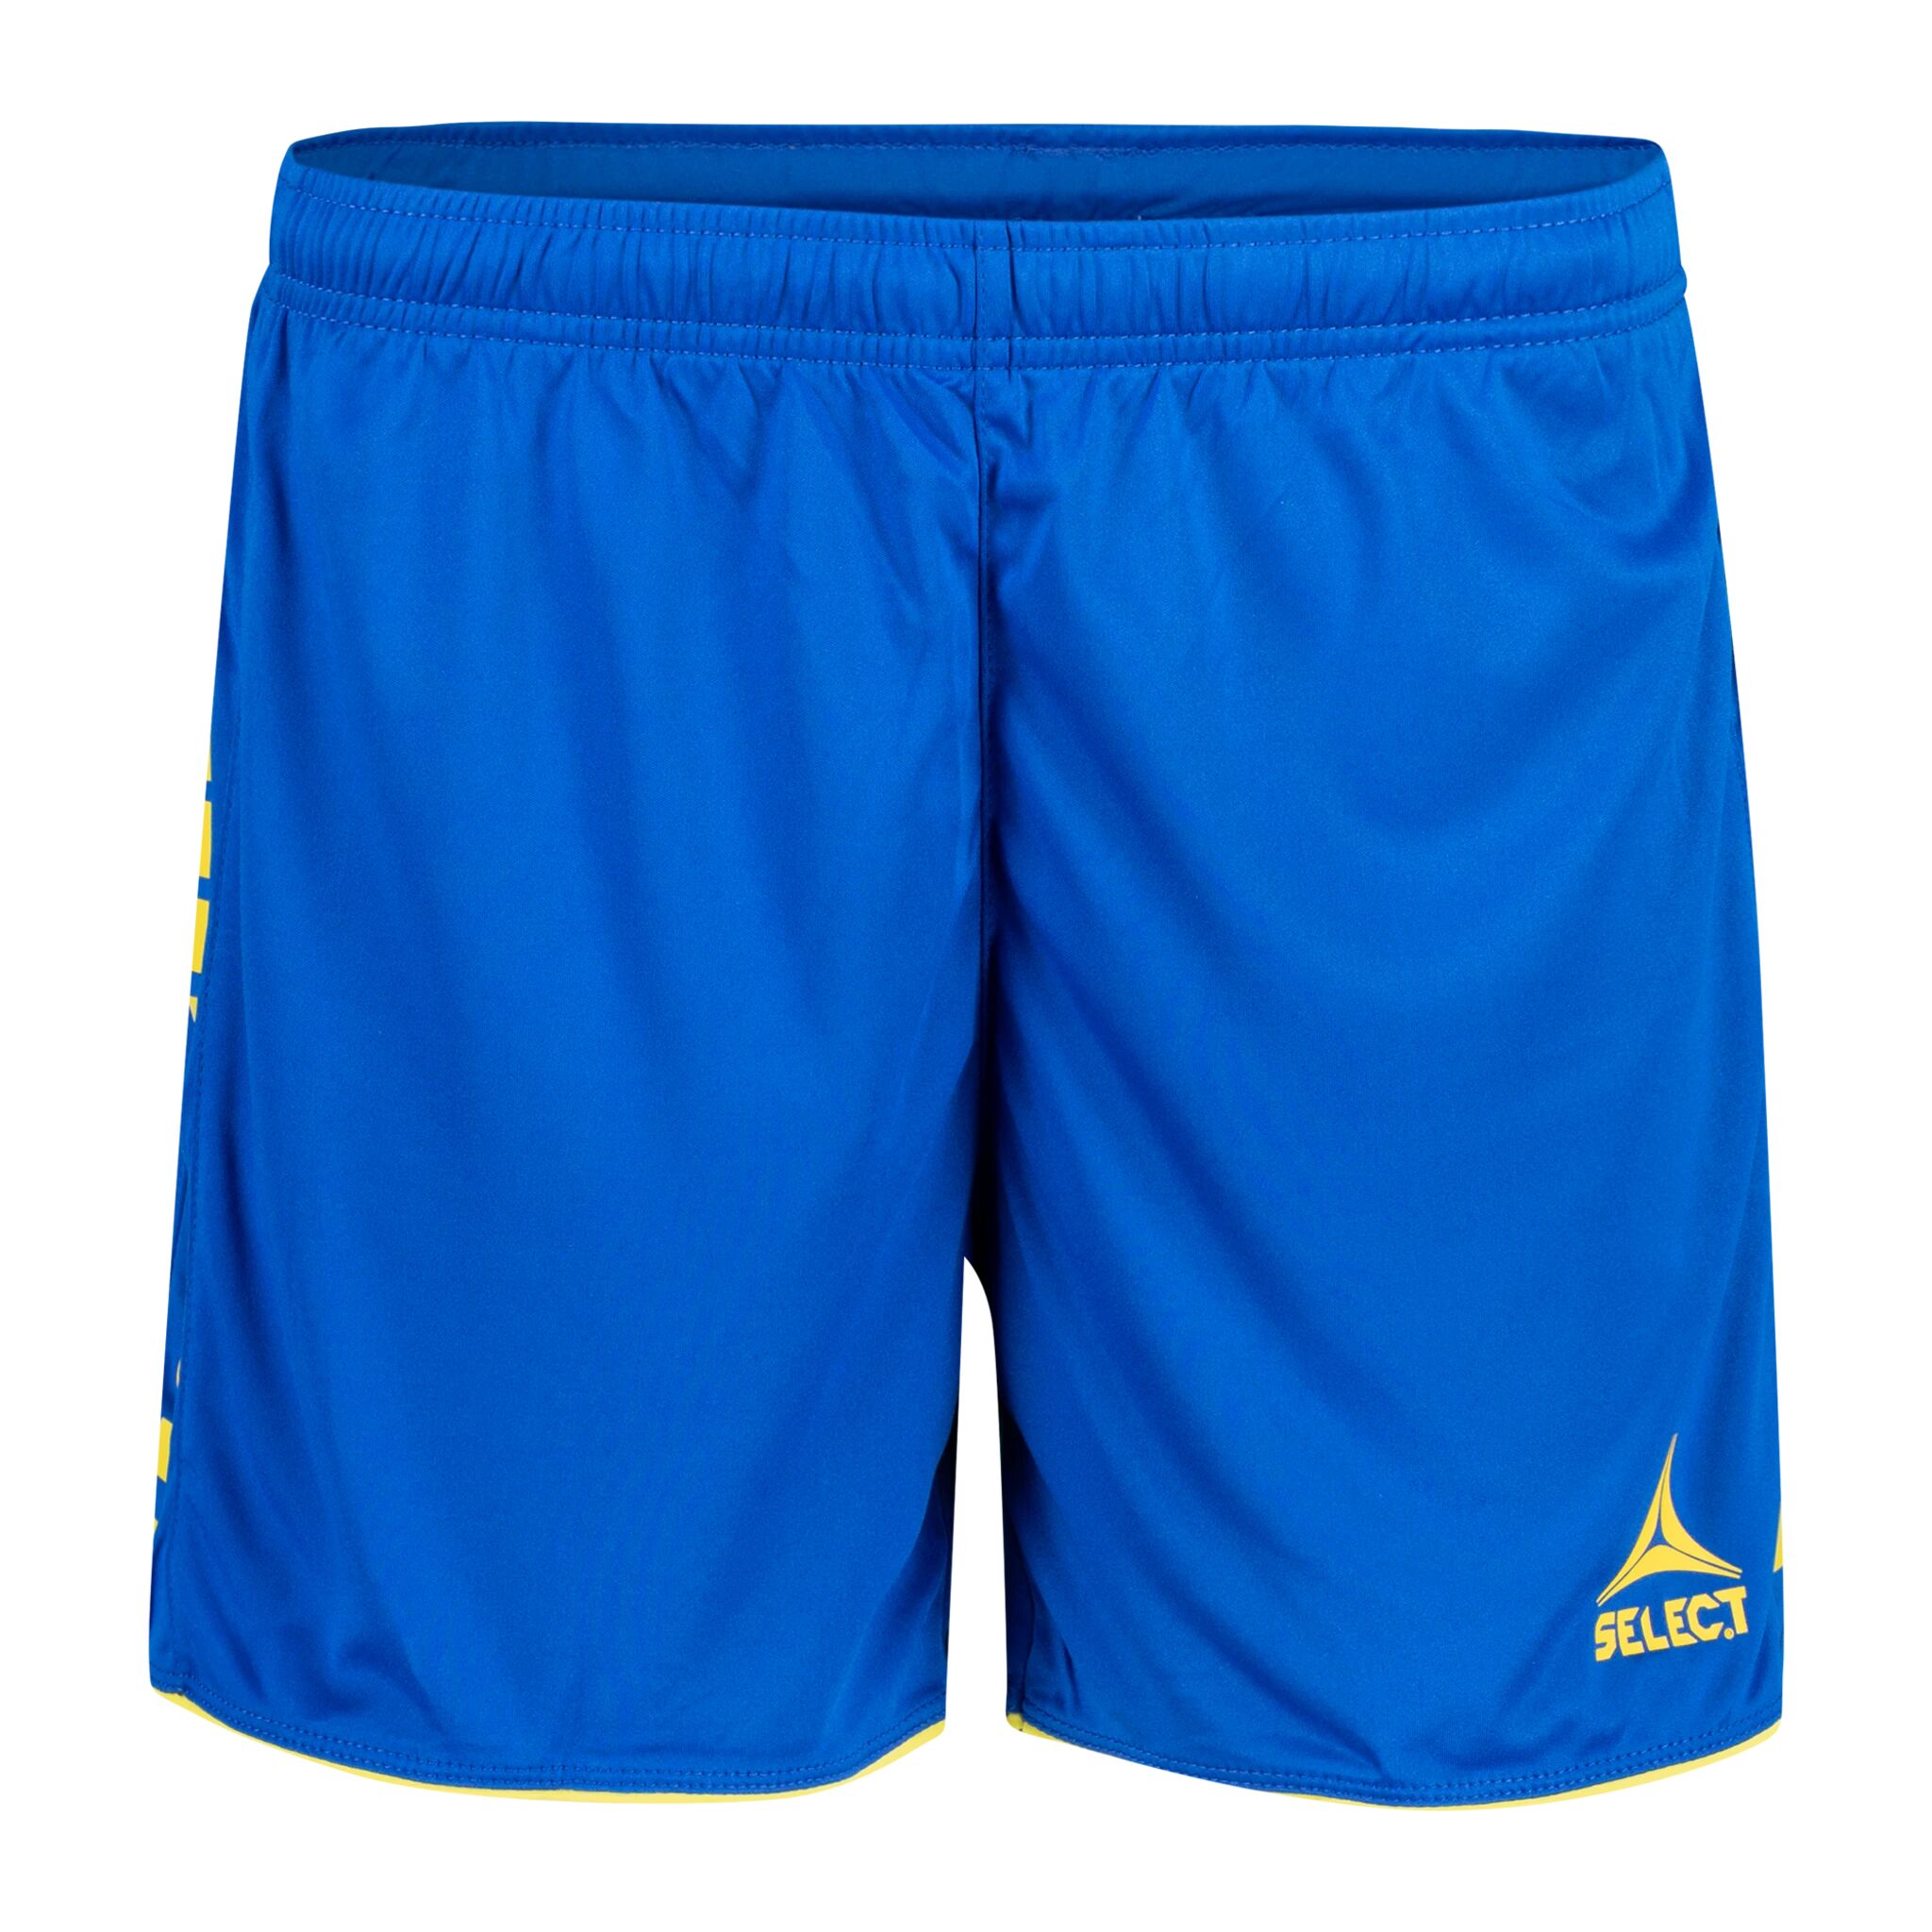 Select Player shorts Argentina, shorts dame S blue